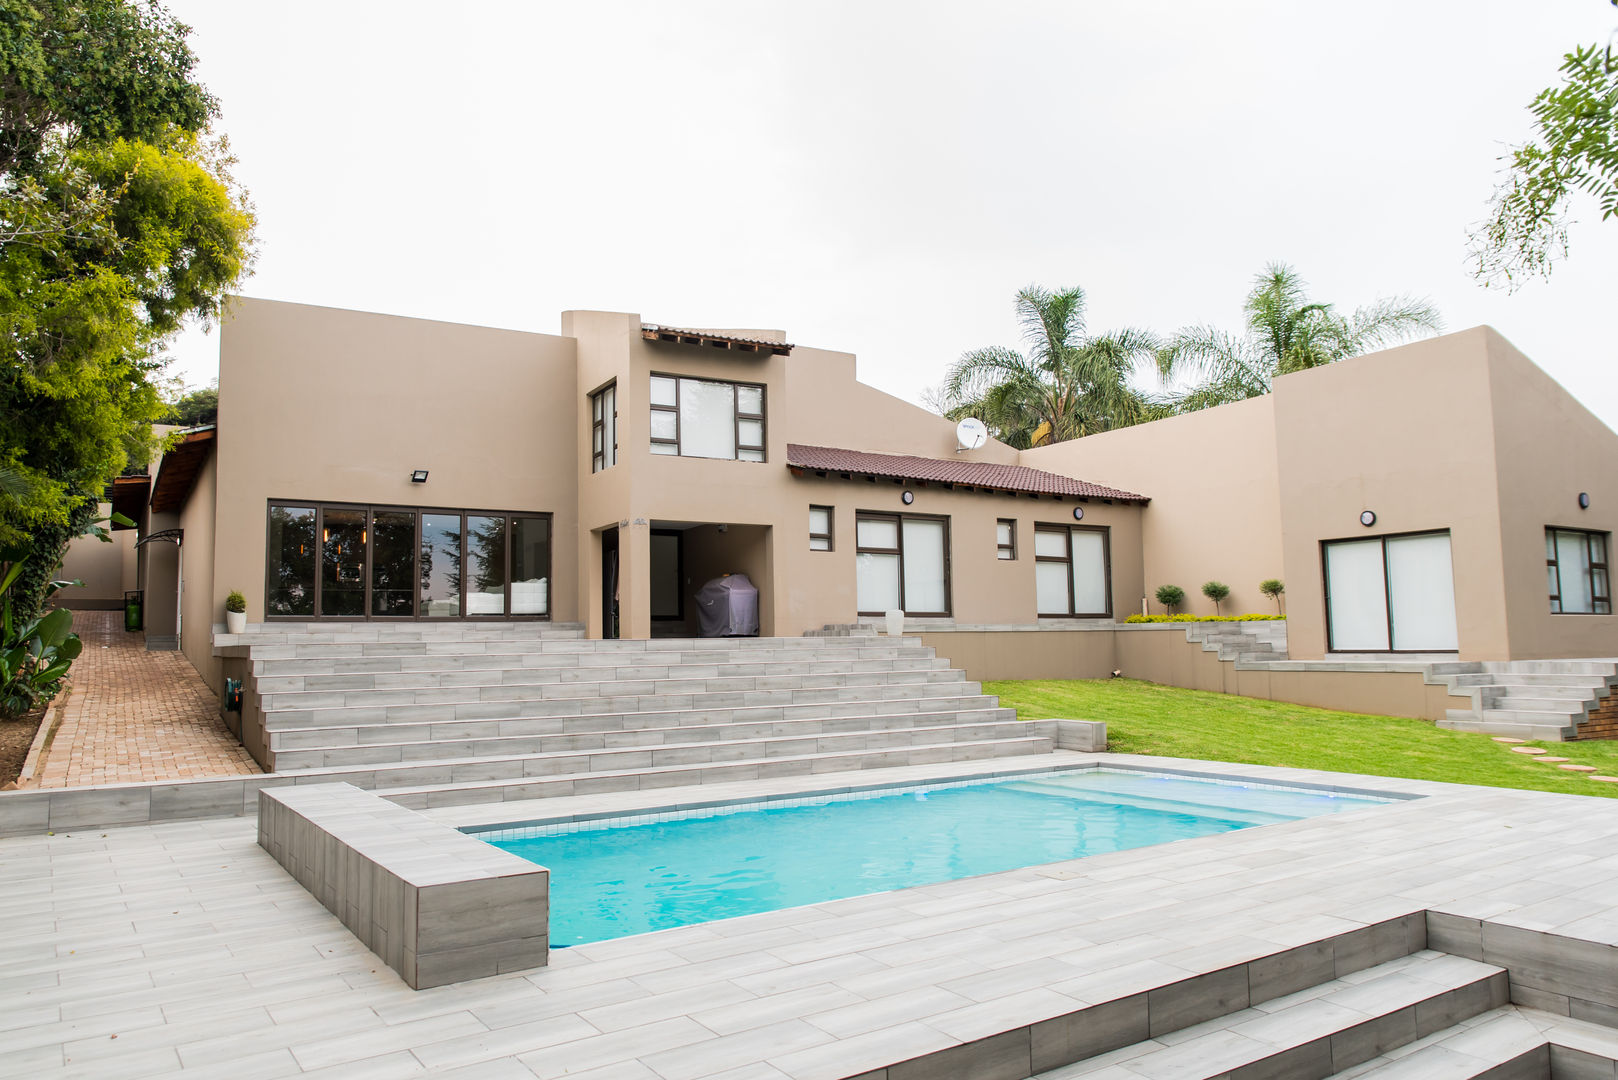 Gamito Residence: a modern look for the outside TOP CENTRE PROPERTIES GROUP (PTY) LTD Modern houses